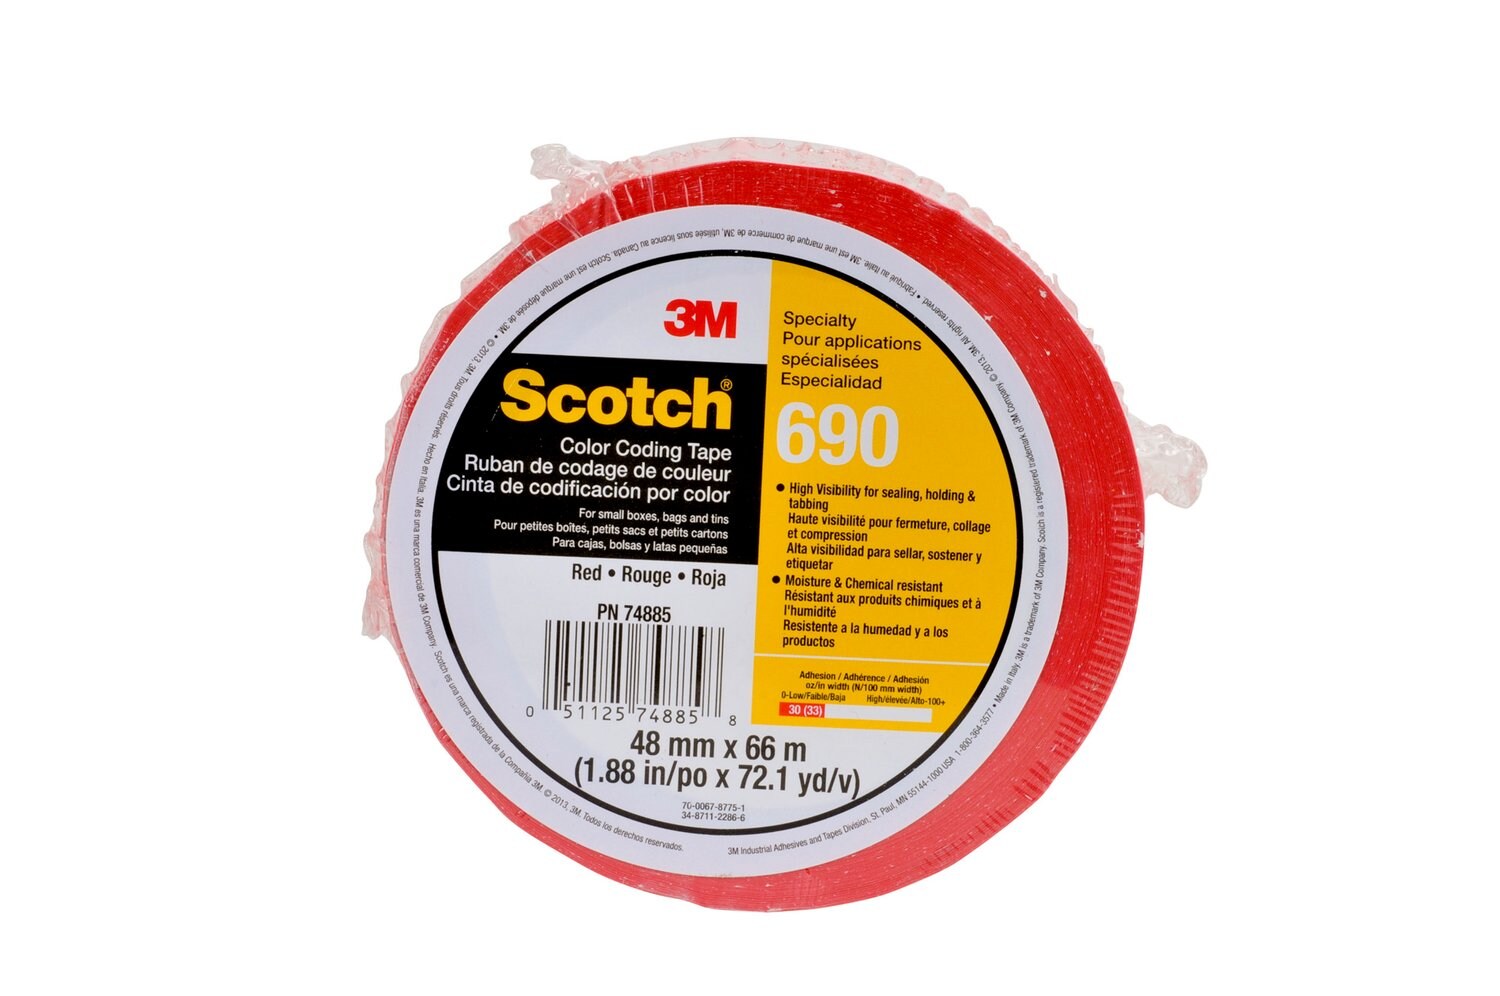 7010375597 - Scotch Color Coding Tape 690, Red, 48 mm x 66 m, 36 Rolls/Case,
Individually Wrapped Conveniently Packaged